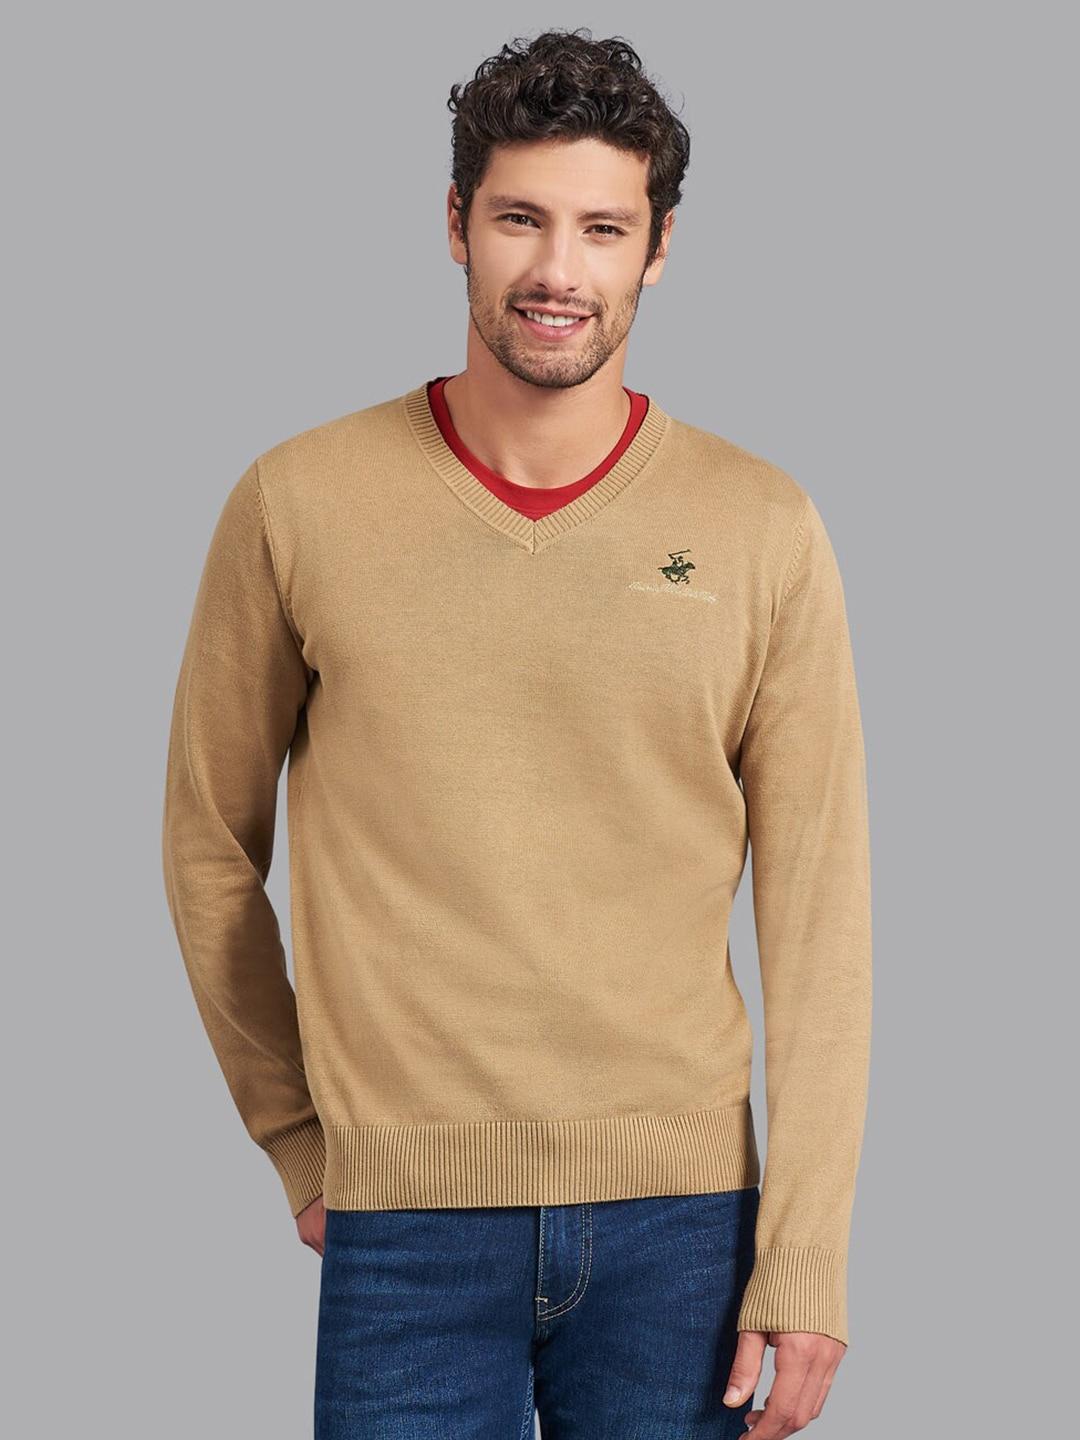 Beverly Hills Polo Club V-Neck Cotton Pullover Sweater